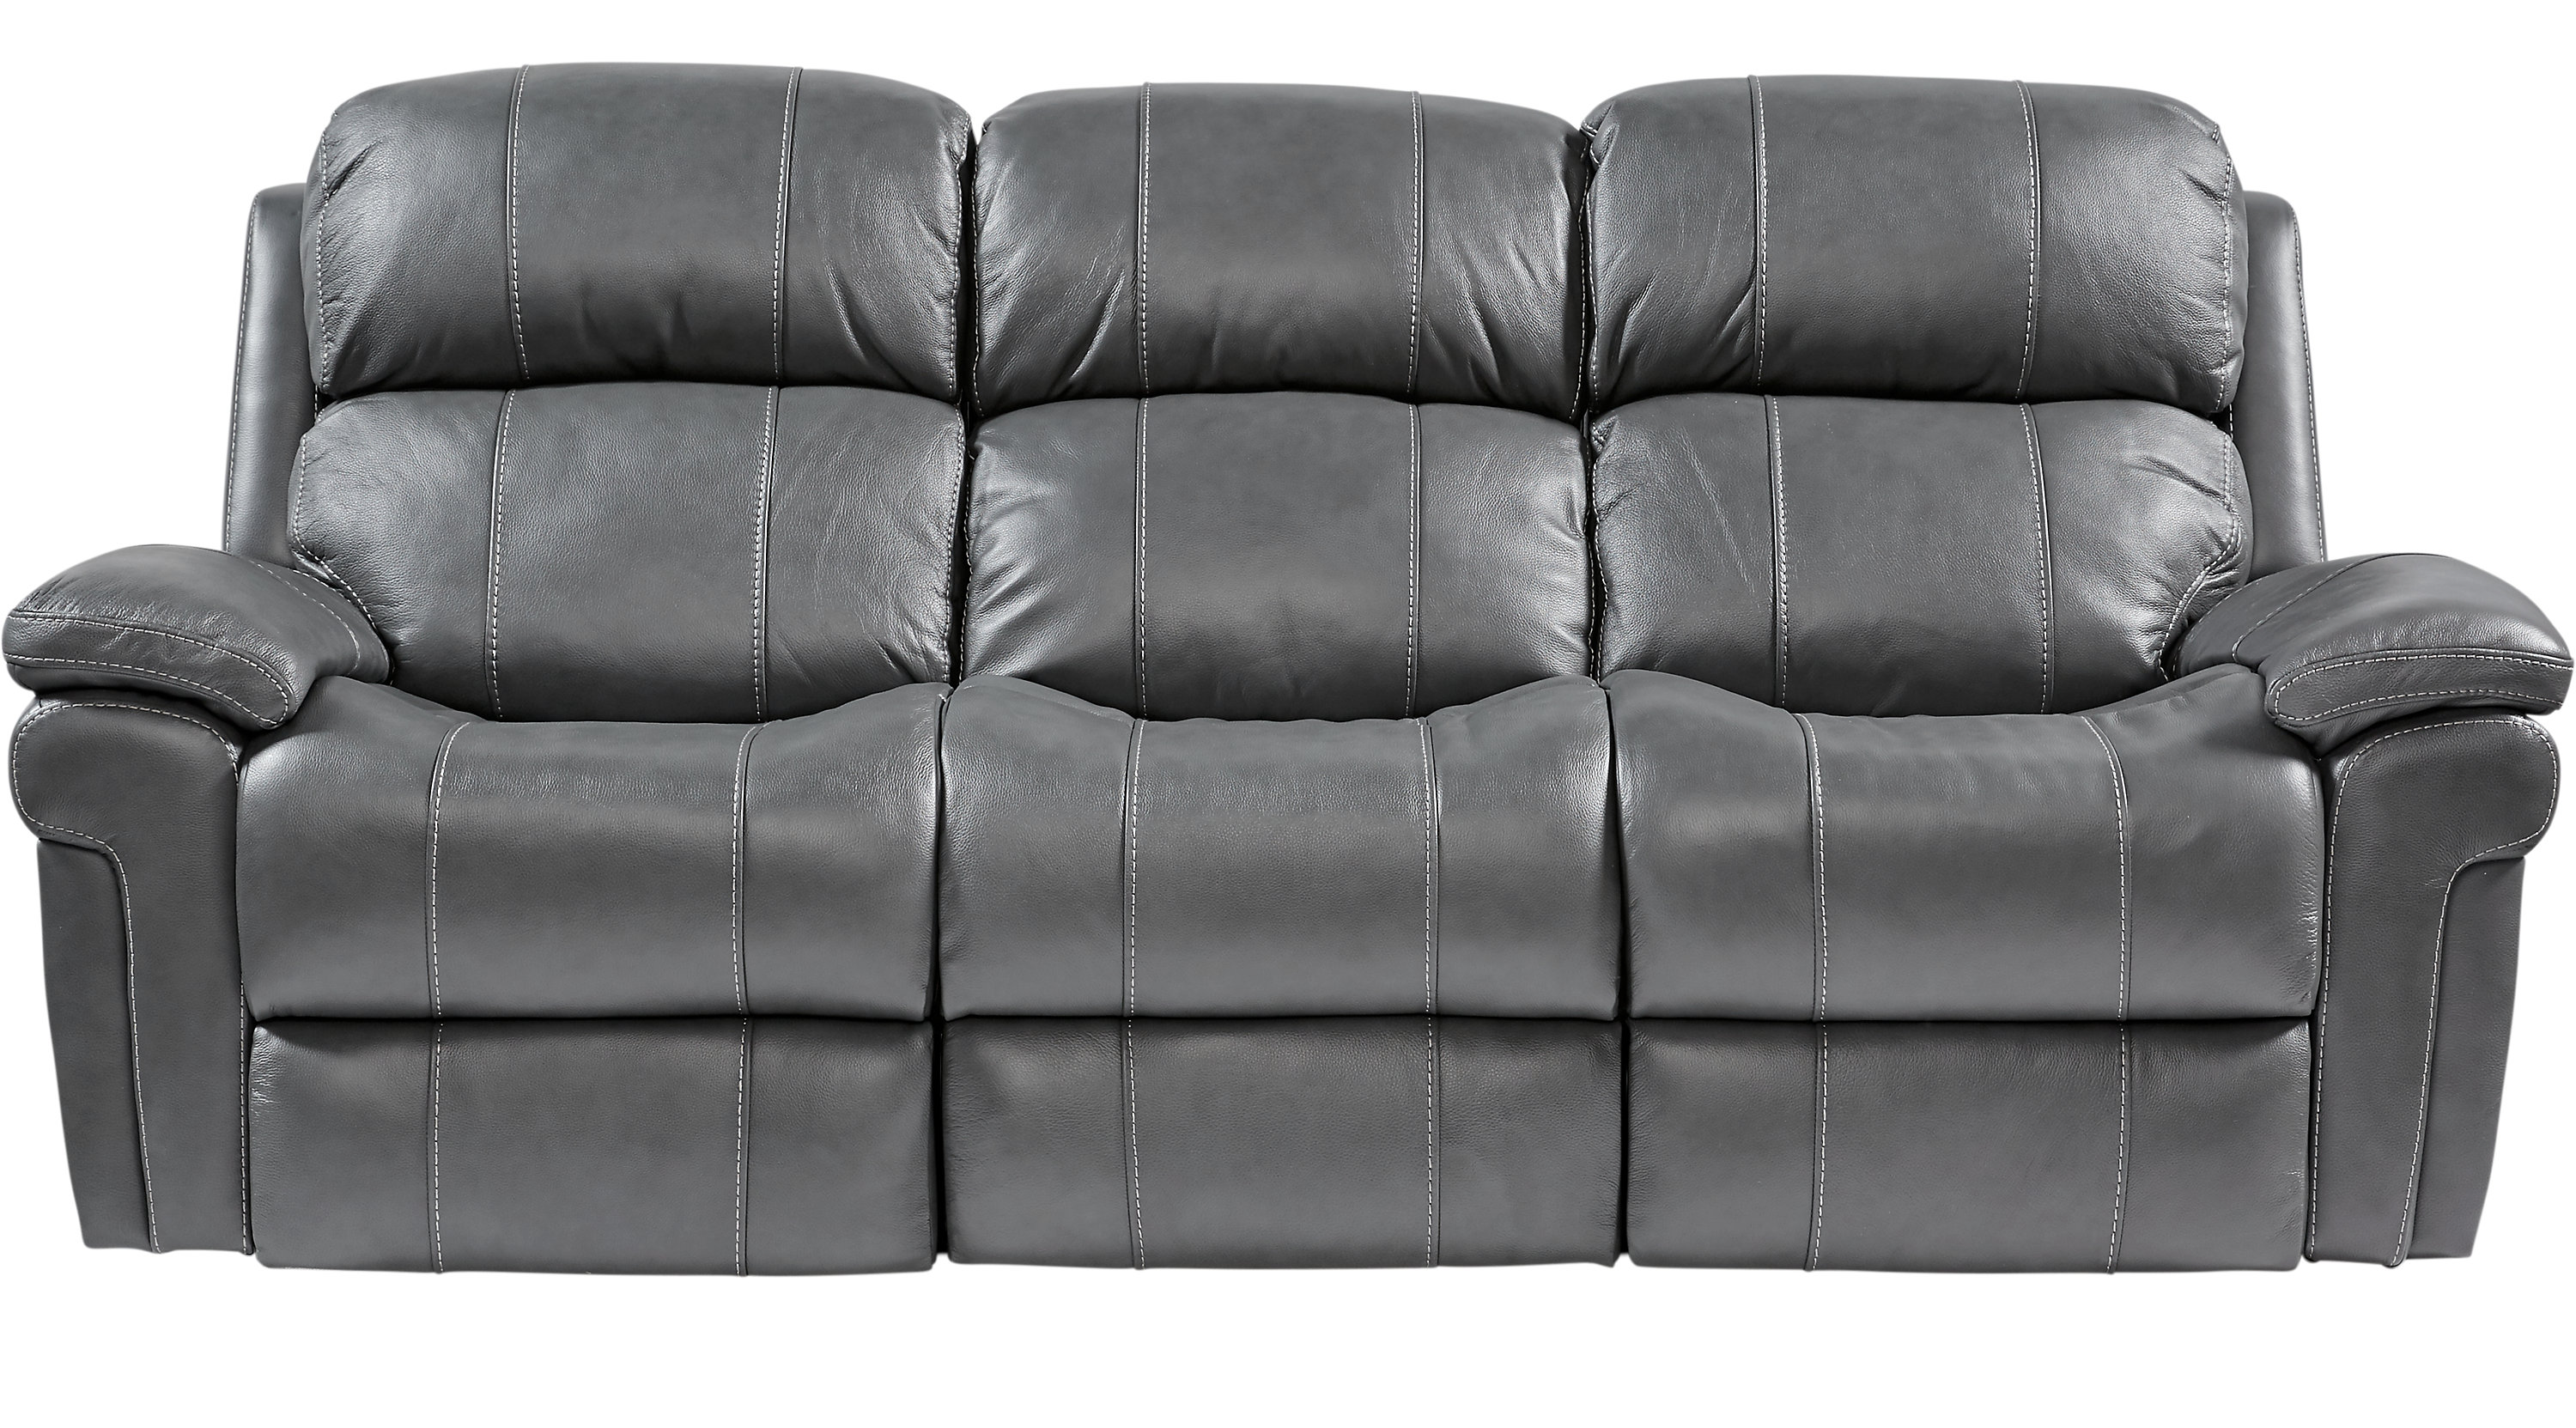 Gray leather reclining sofa is a beautiful selection for